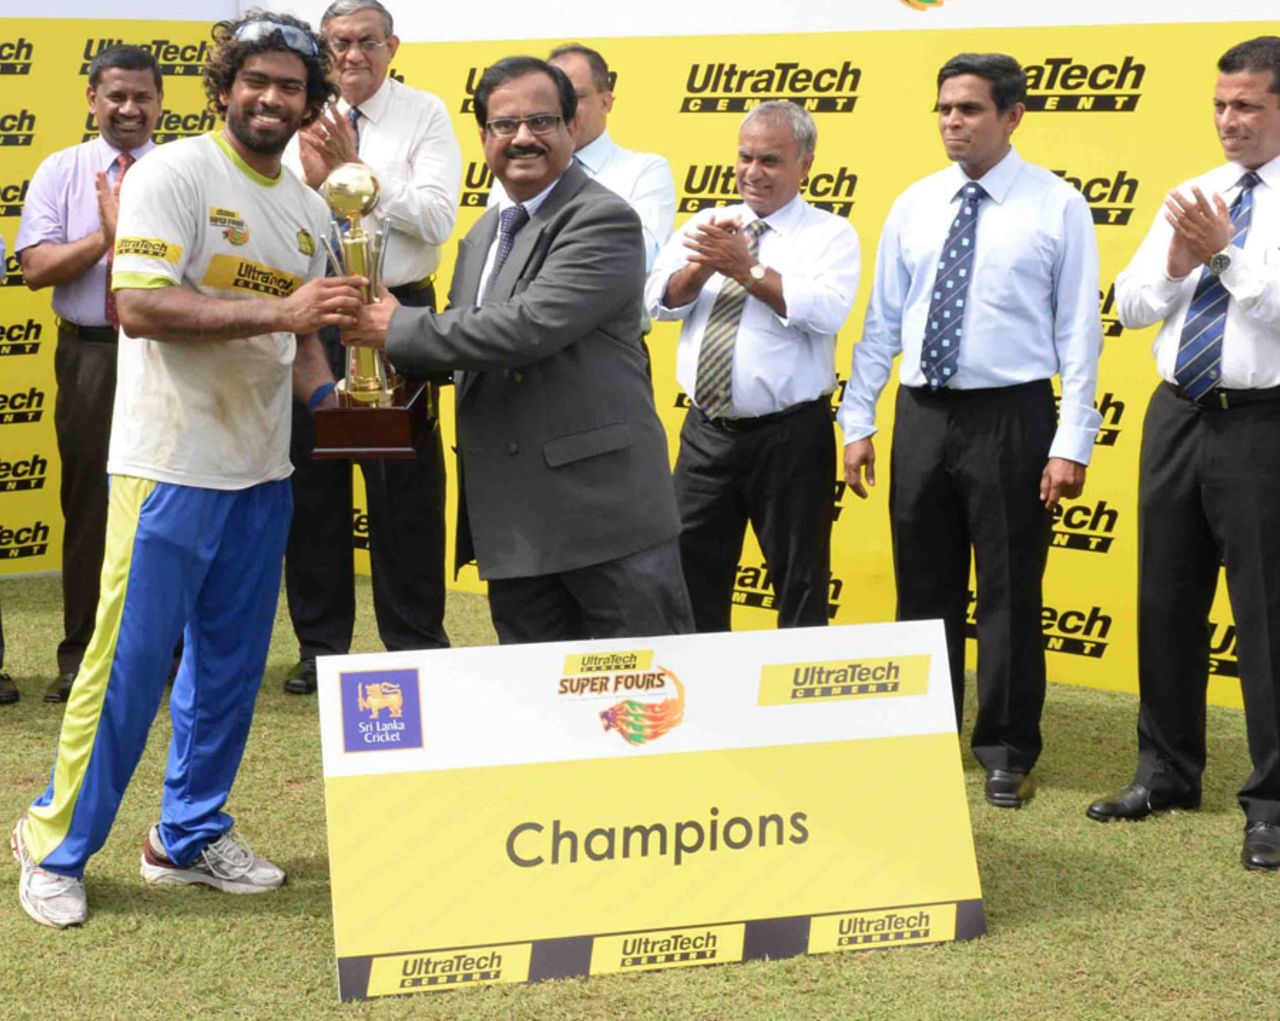 Southern Express captain Lasith Malinga accepts the trophy, Udarata Rulers v Southern Express, SLC Super 4's T20 Tournament, Final, Colombo, July 2, 2014